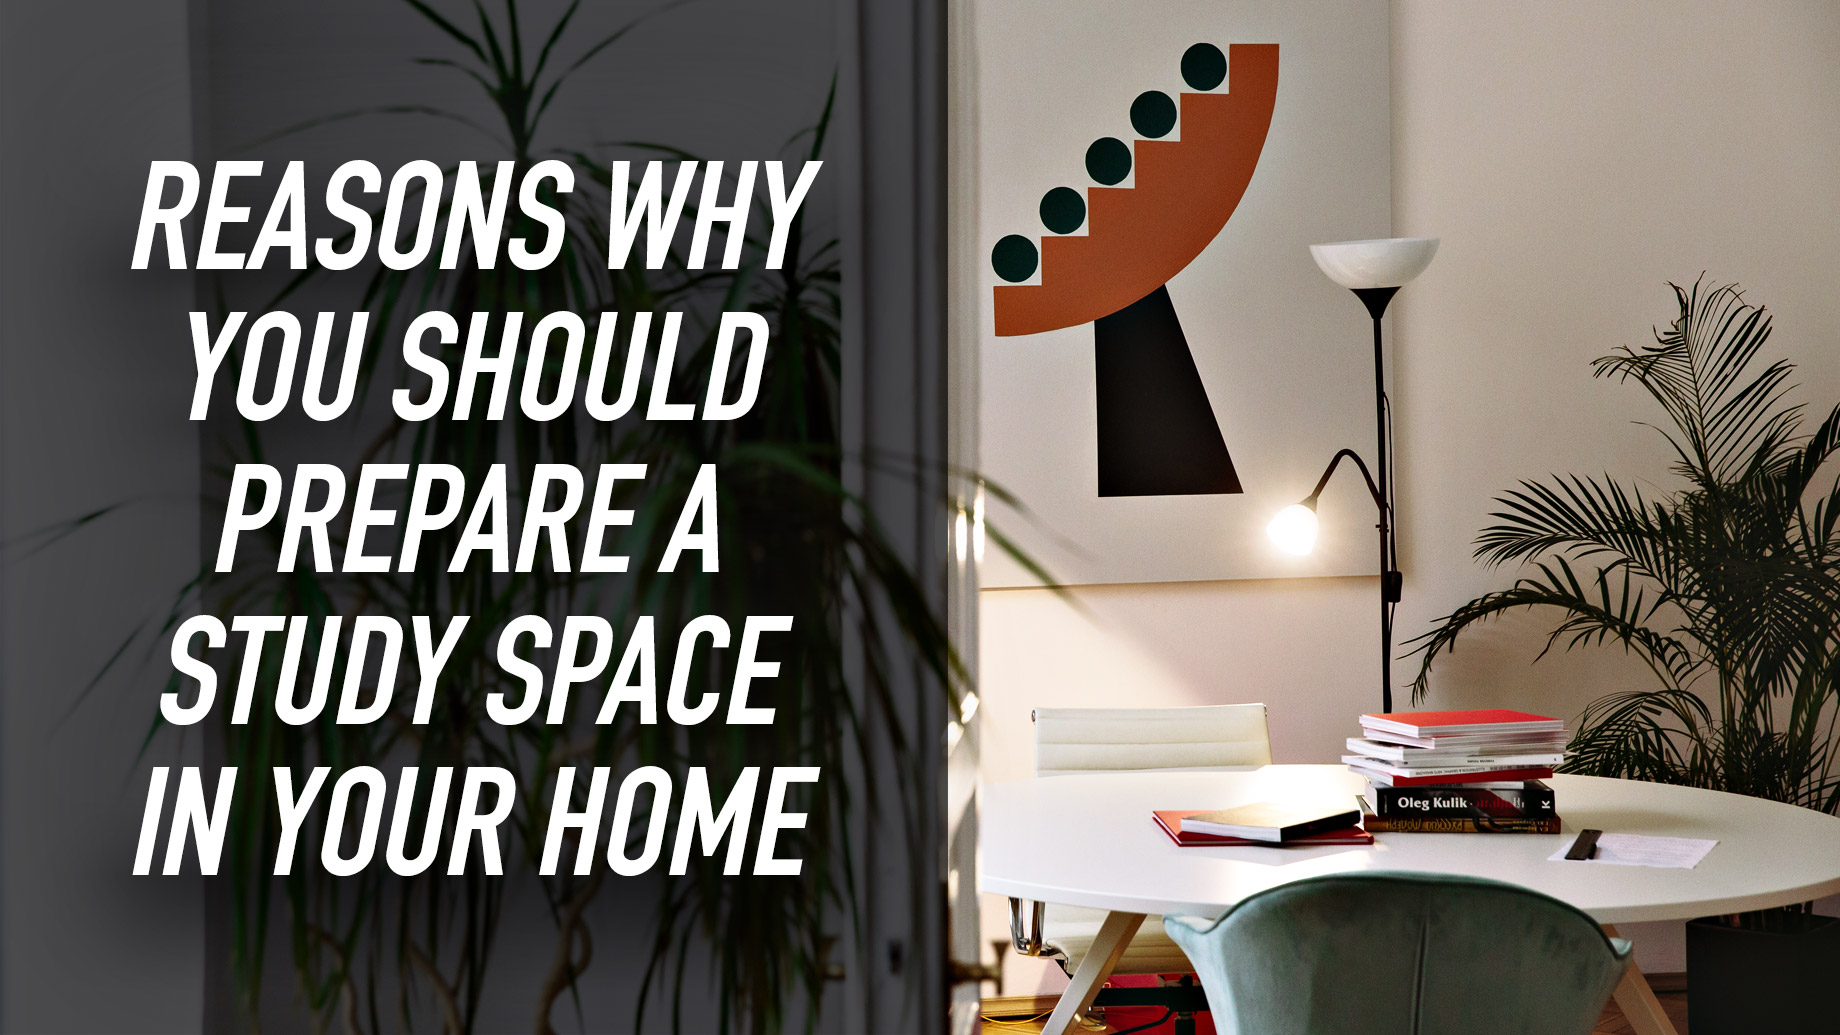 Reasons Why You Should Prepare a Study Space in Your Home